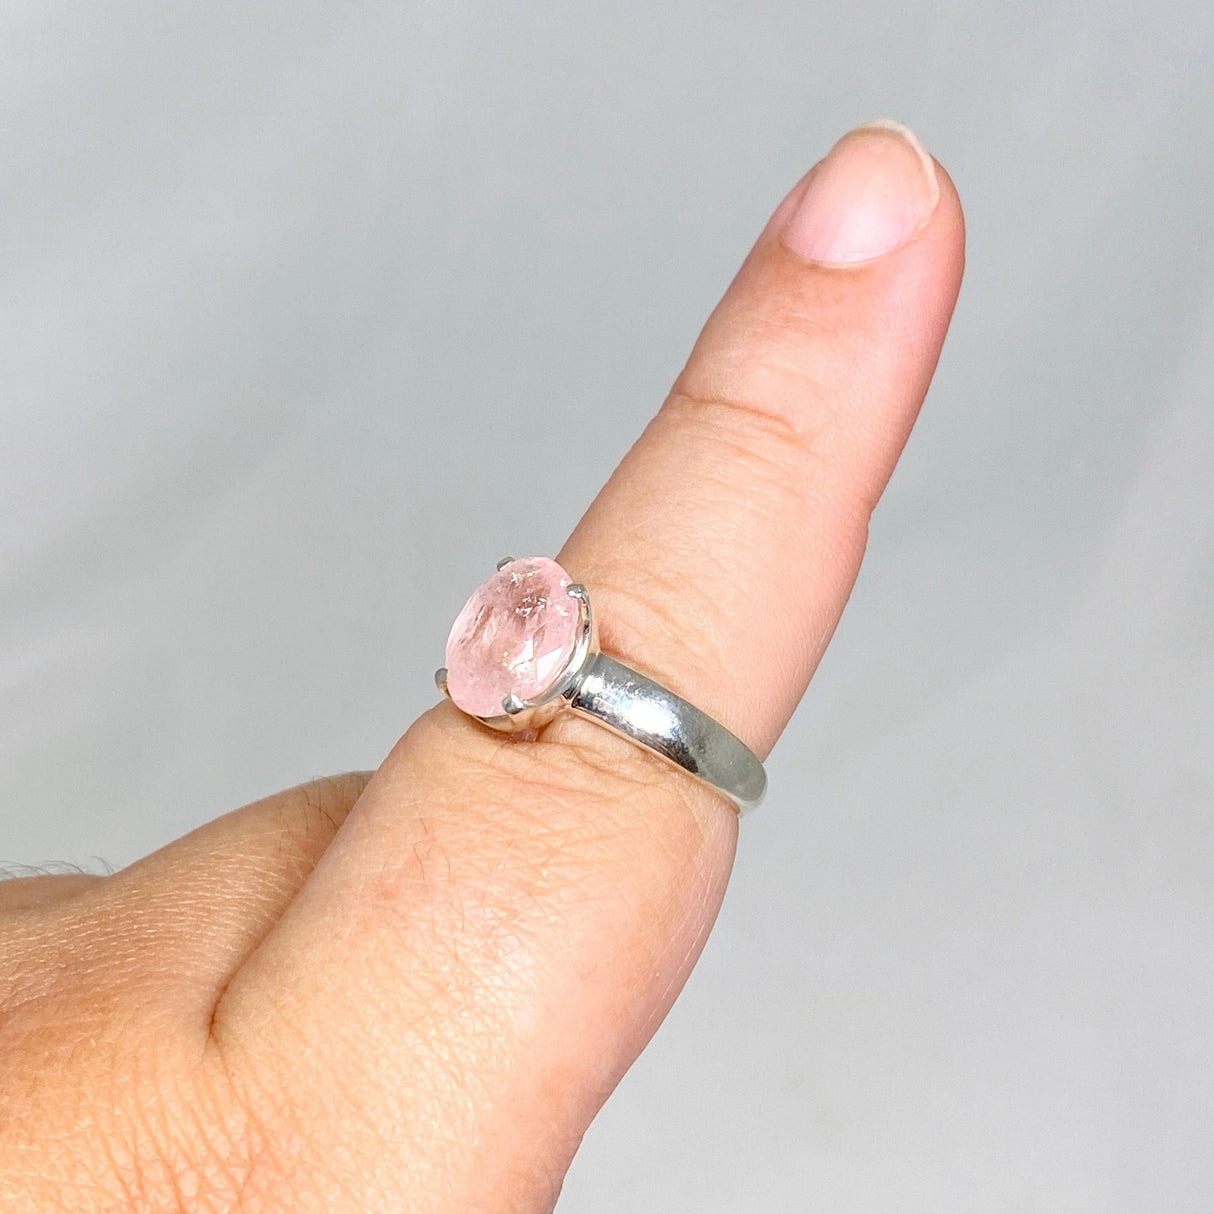 Morganite Faceted Oval Ring Size 9 PRGJ441 - Nature's Magick